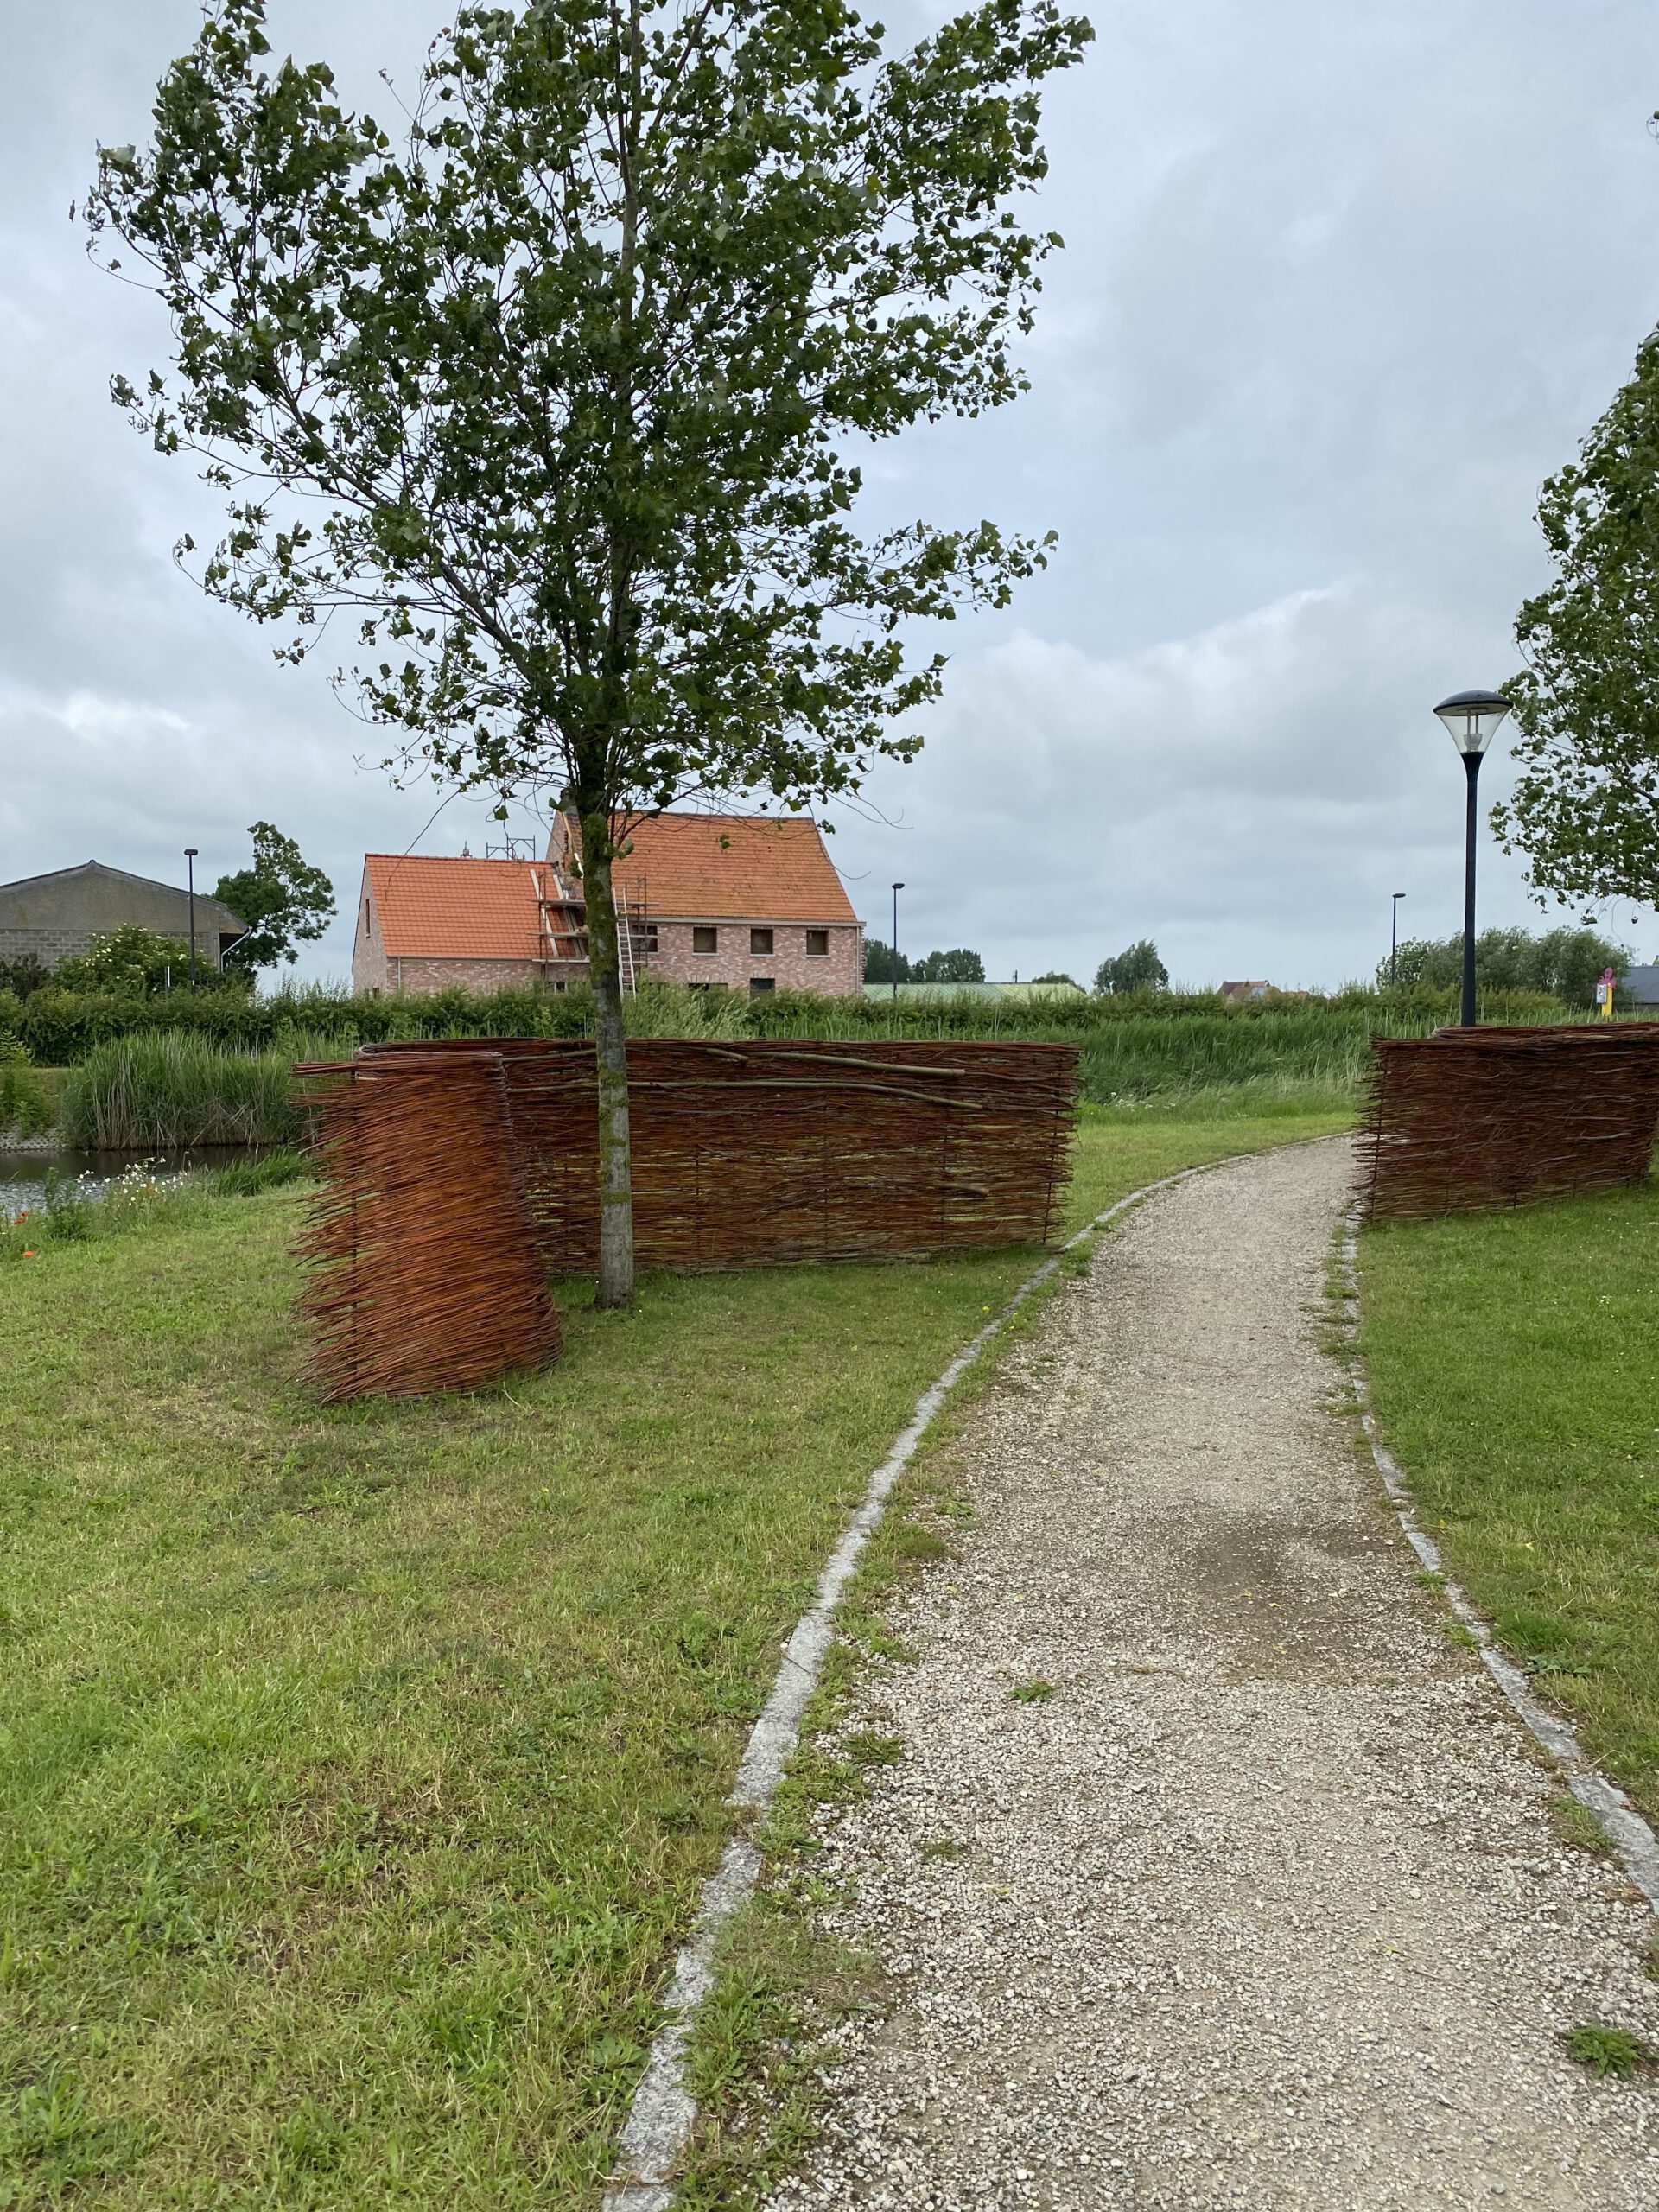 A FANTASTIC LAND-ART PROJECT BY GEERT PATTYN IN THE COAST AREA OF FLANDERS - An Theunynck on thursd